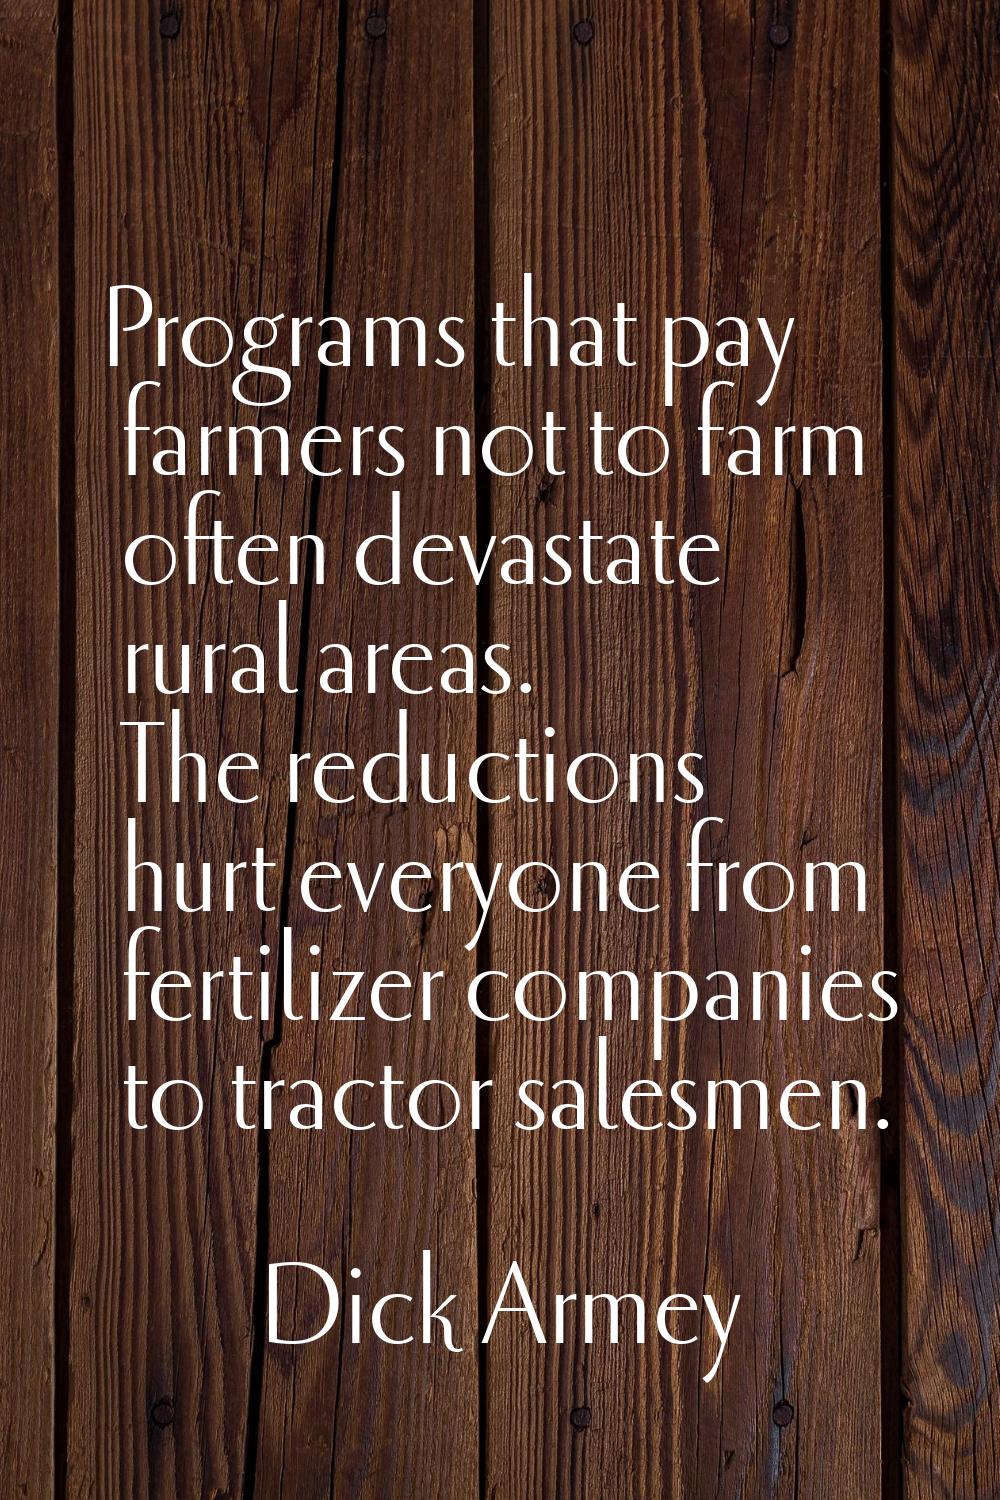 Programs that pay farmers not to farm often devastate rural areas. The reductions hurt everyone fro